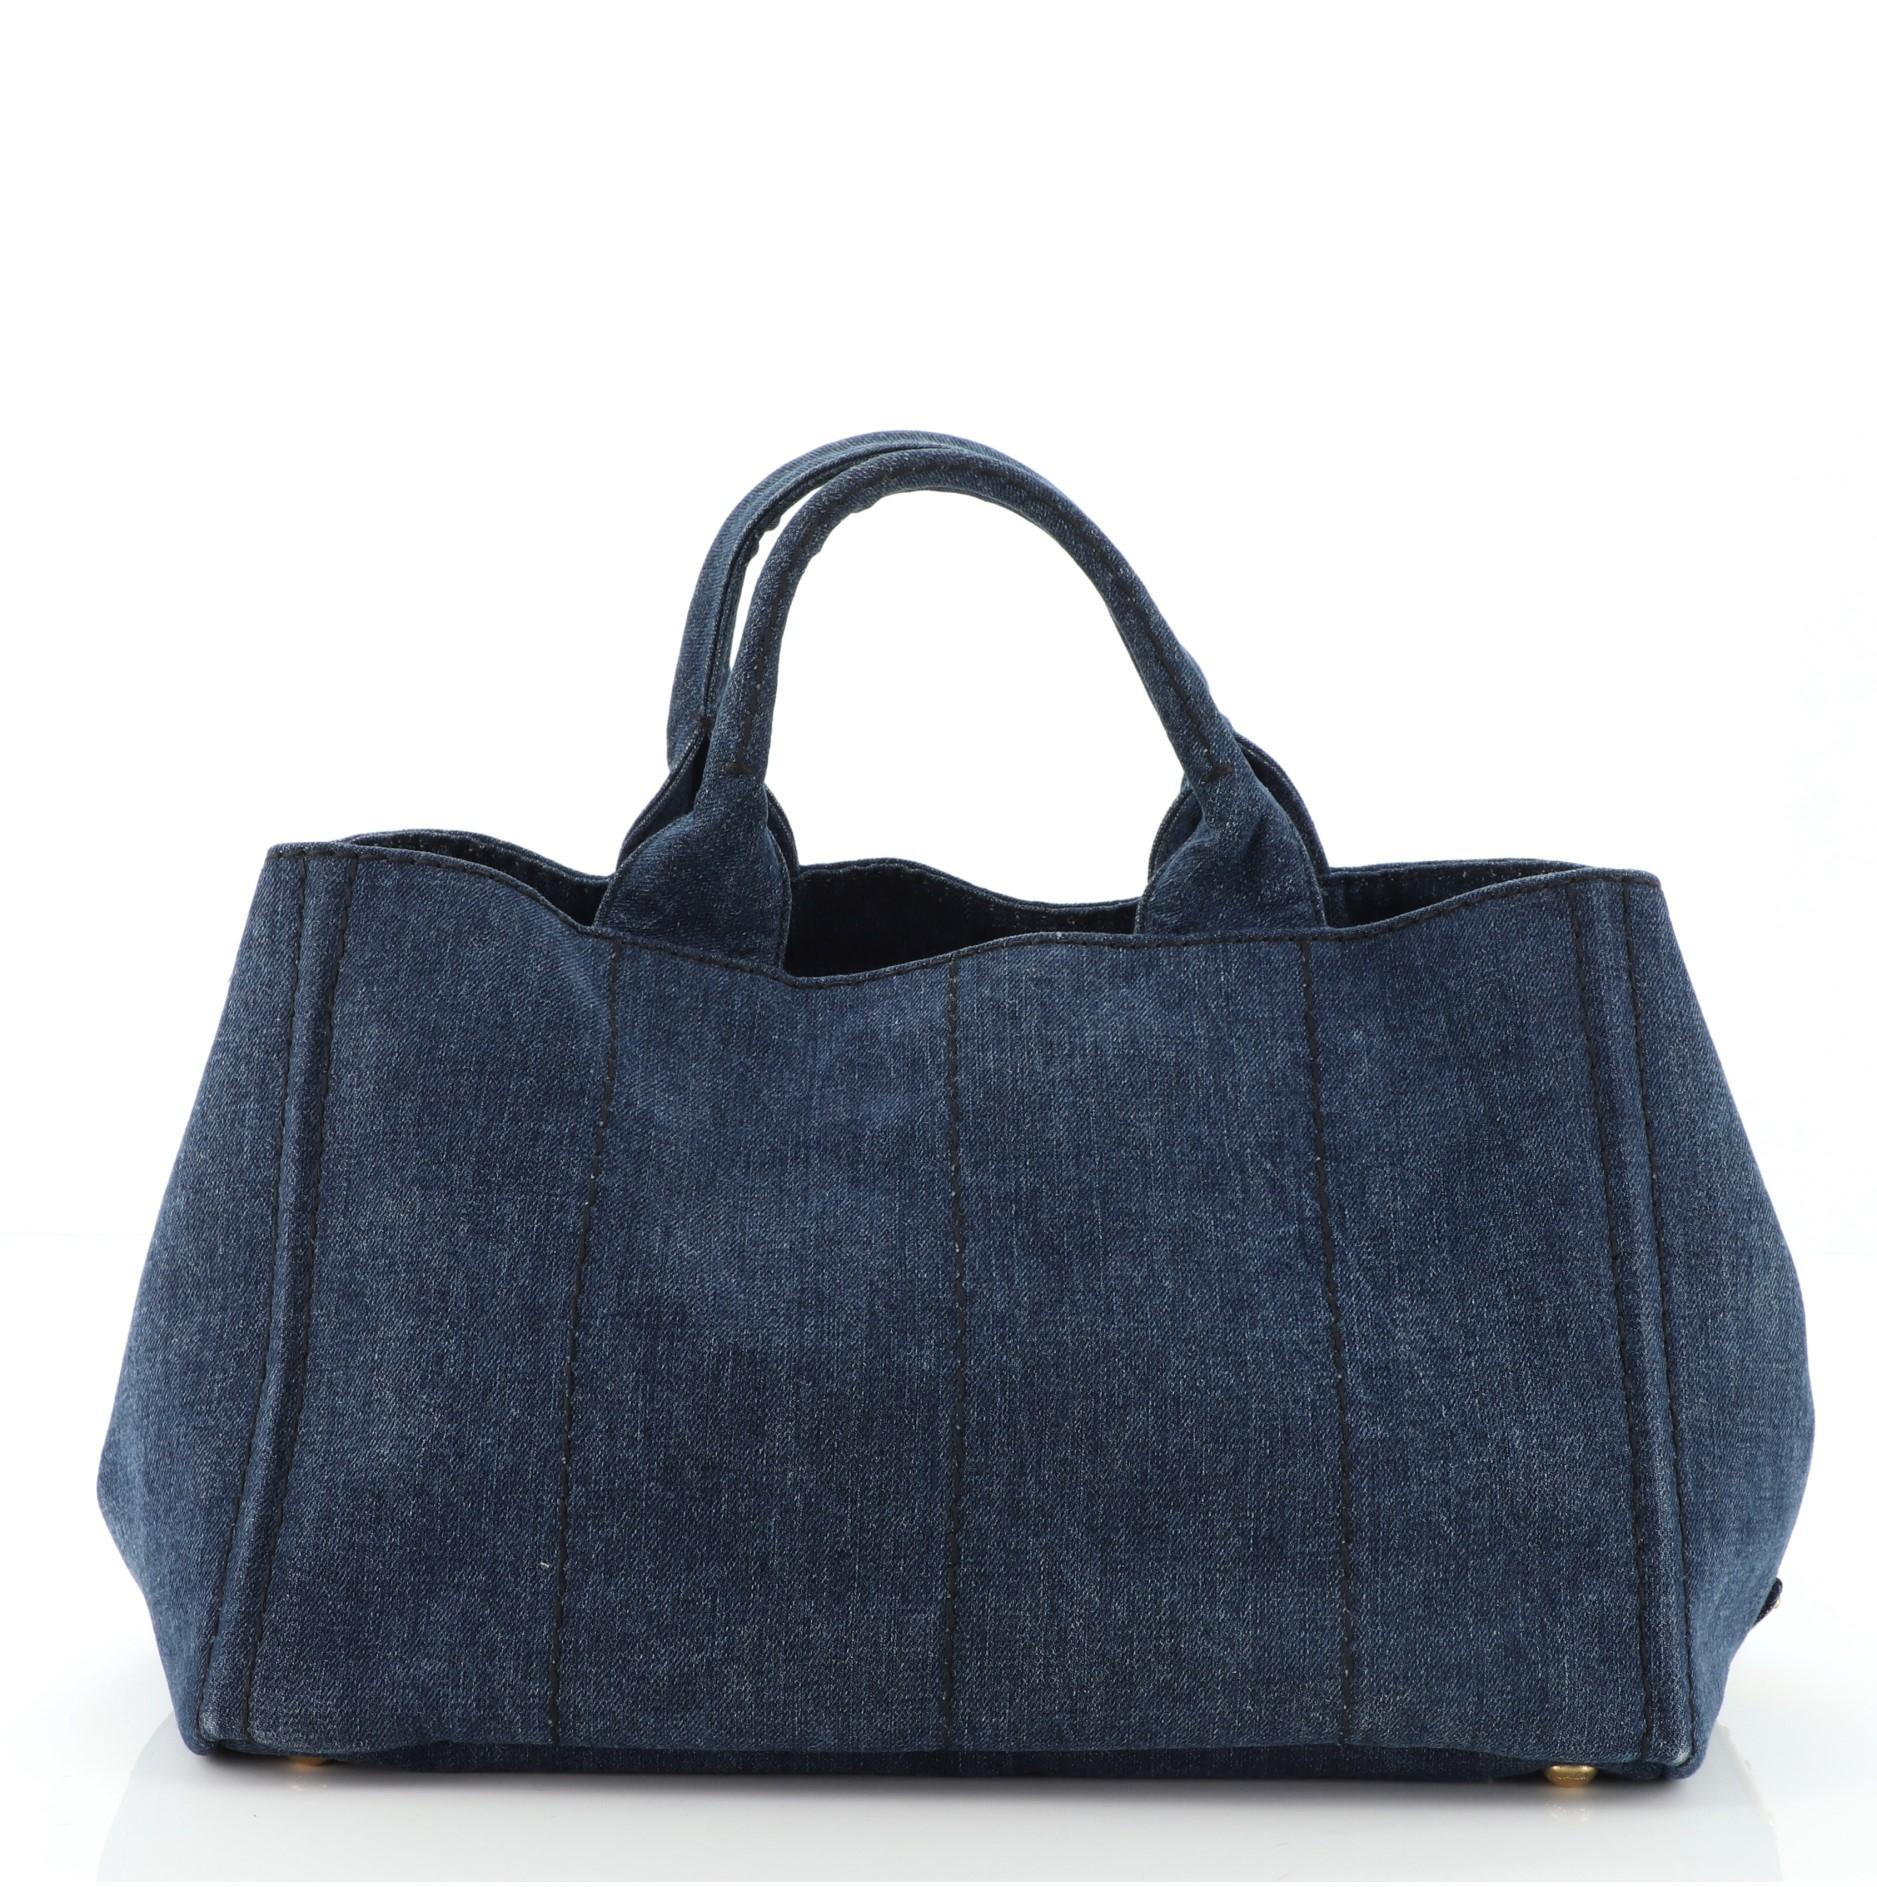 Prada Canapa Convertible Tote Denim Medium is crafted in blue denim and canvas, features dual top handles, side snap buttons, protective base studs, and gold-tone hardware. It opens to a blue denim and canvas interior with side zip and slip